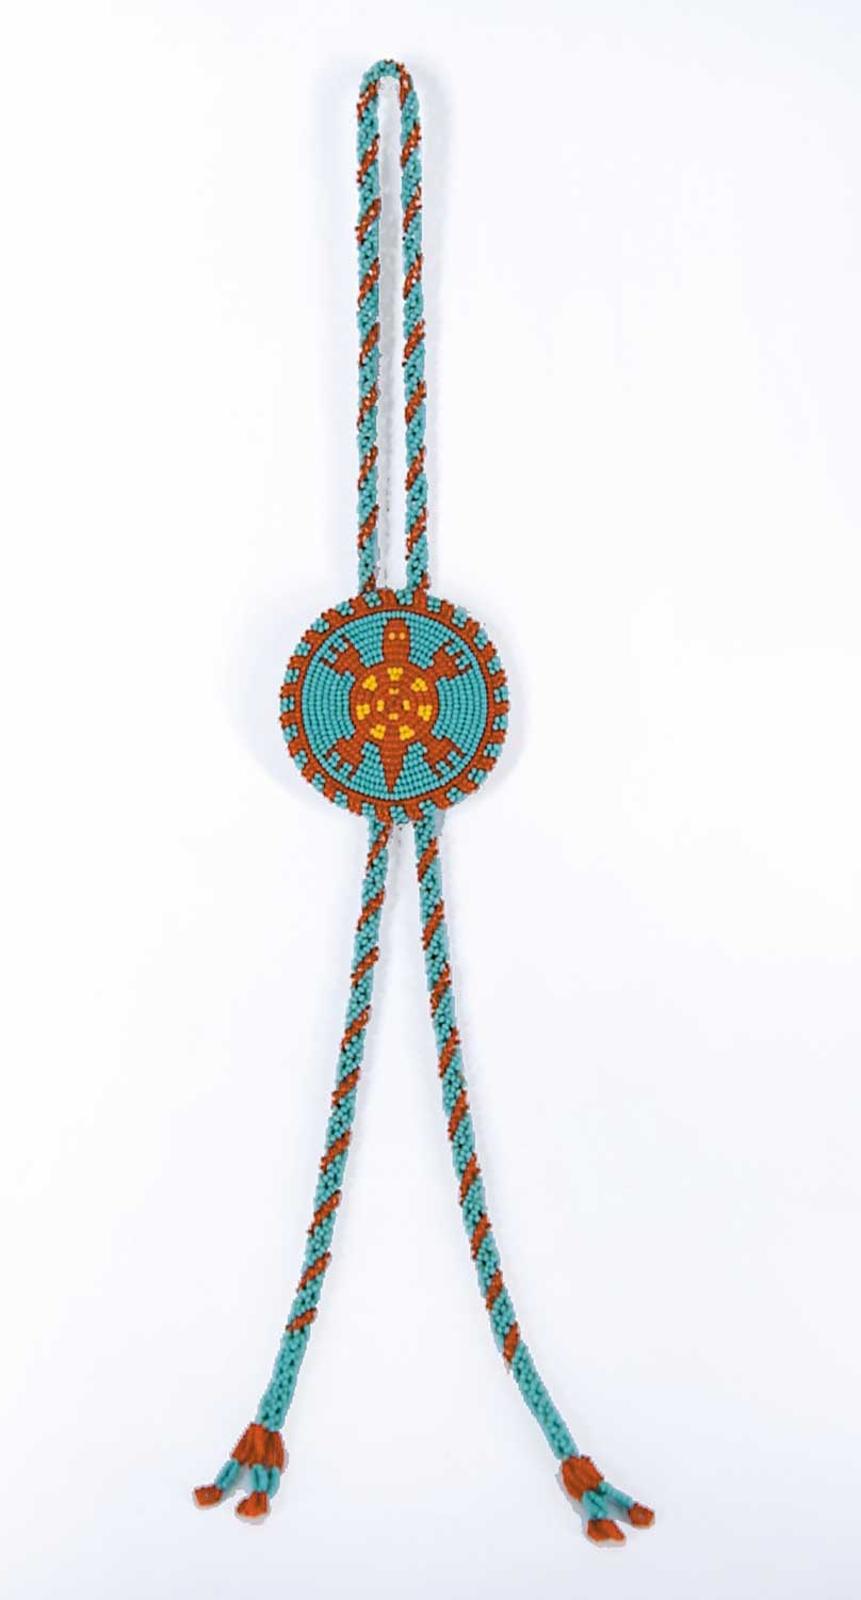 Robert Charles Aller (1922-2008) - Untitled - Blue and Red Beaded Necklace with Leather and Bead Bolo